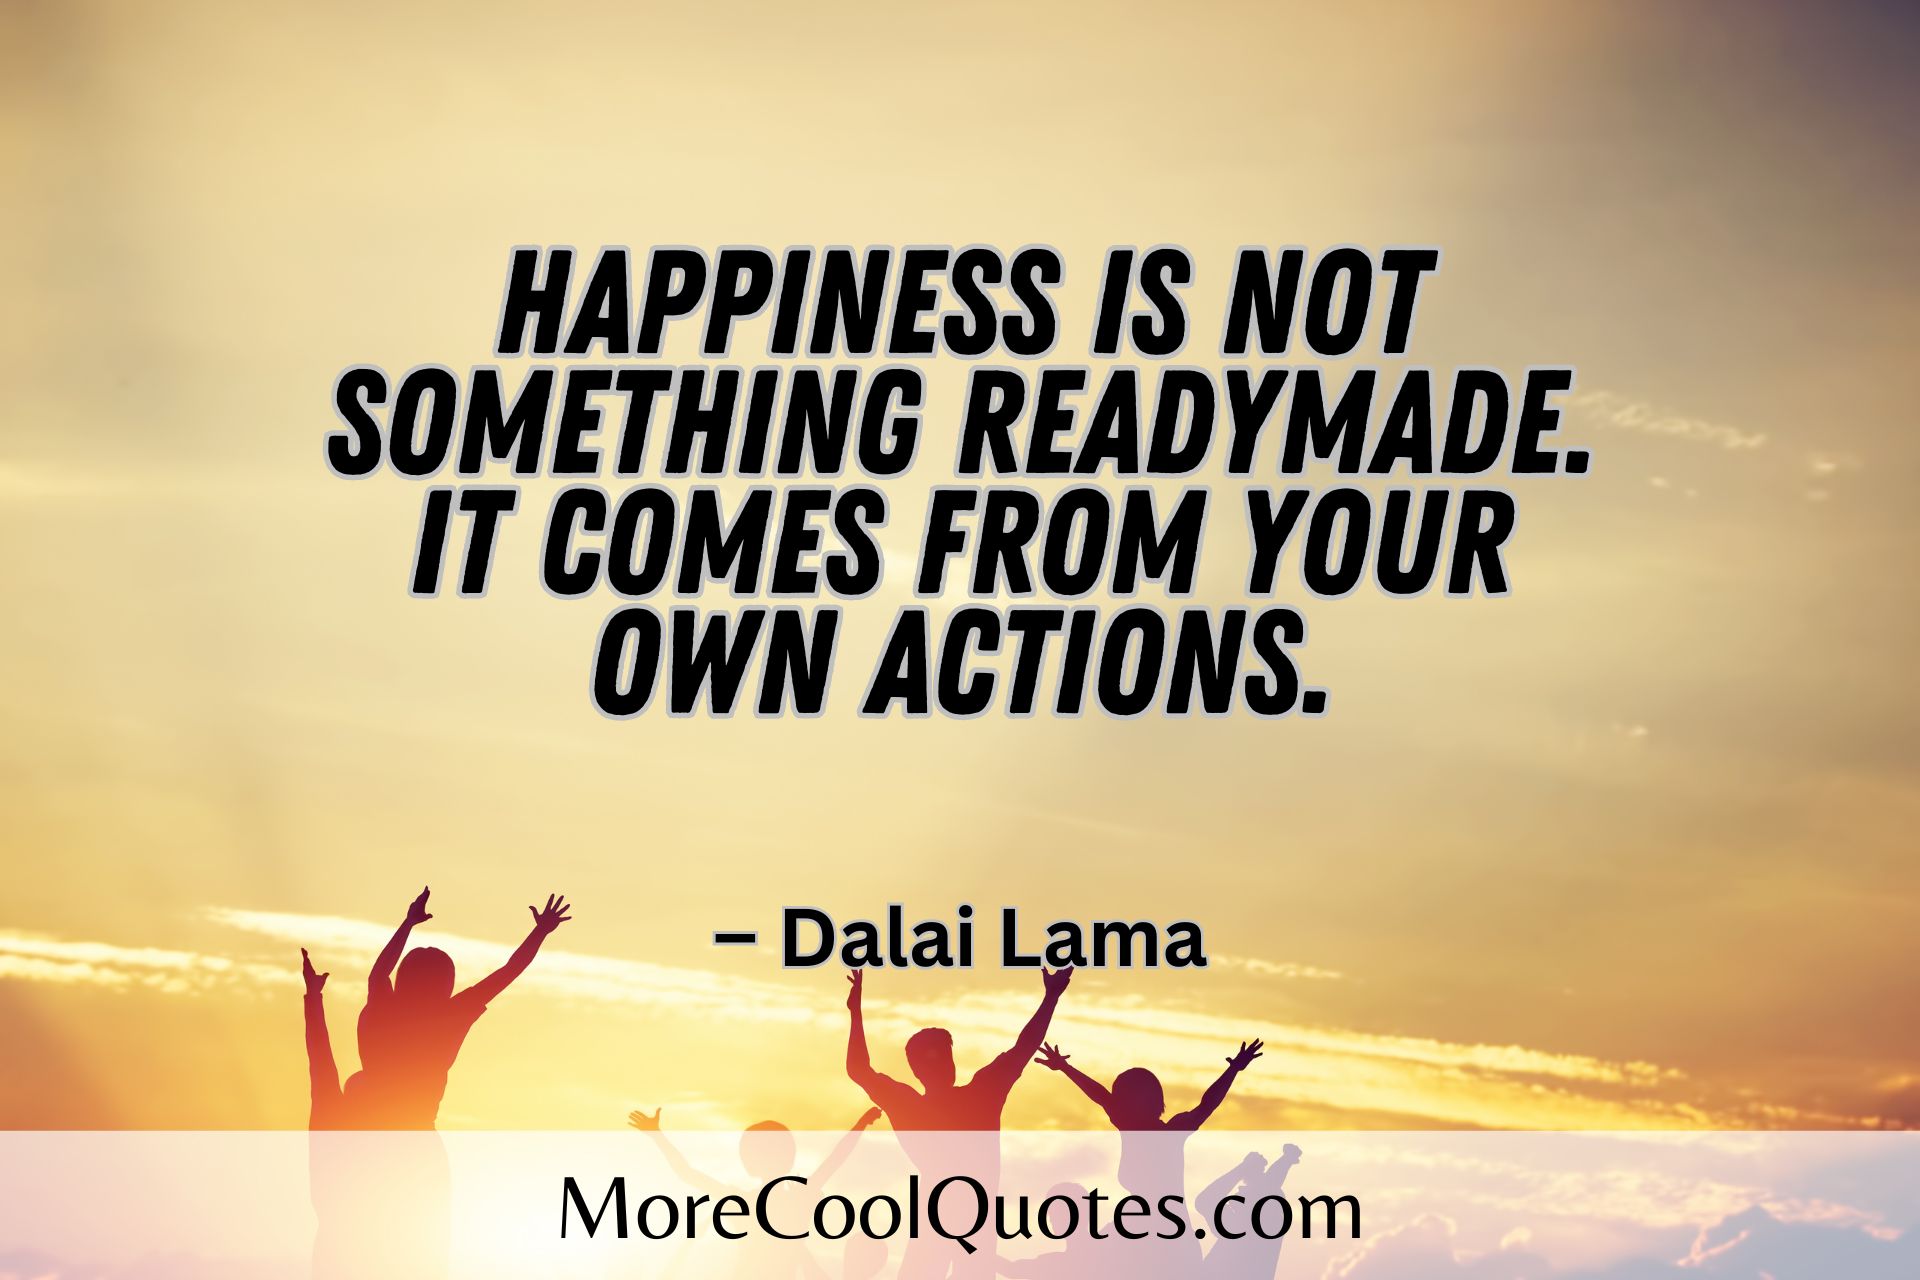 Happiness is not something readymade